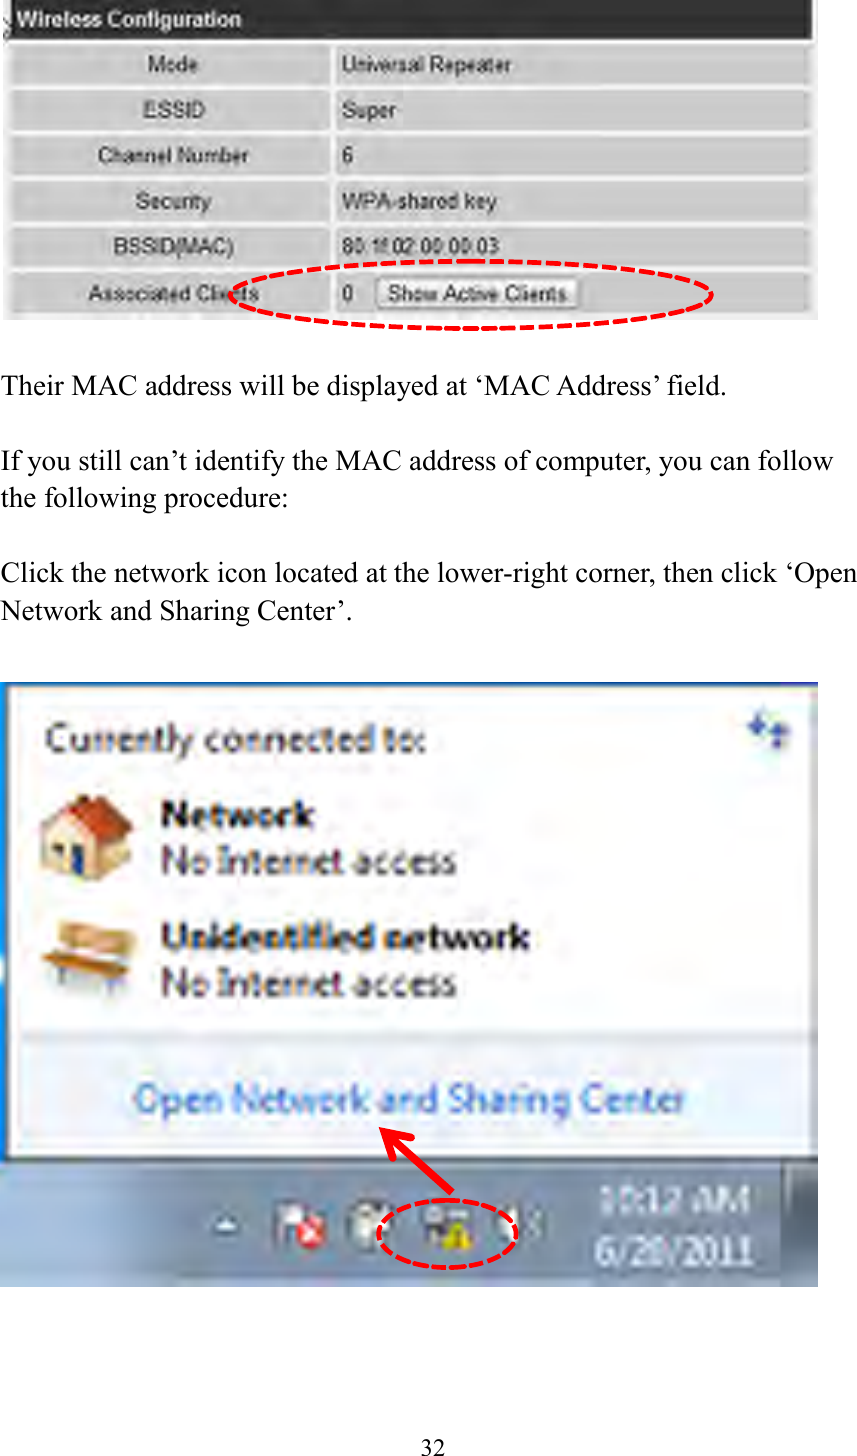  32    Their MAC address will be displayed at ‘MAC Address’ field.  If you still can’t identify the MAC address of computer, you can follow the following procedure:  Click the network icon located at the lower-right corner, then click ‘Open Network and Sharing Center’.       